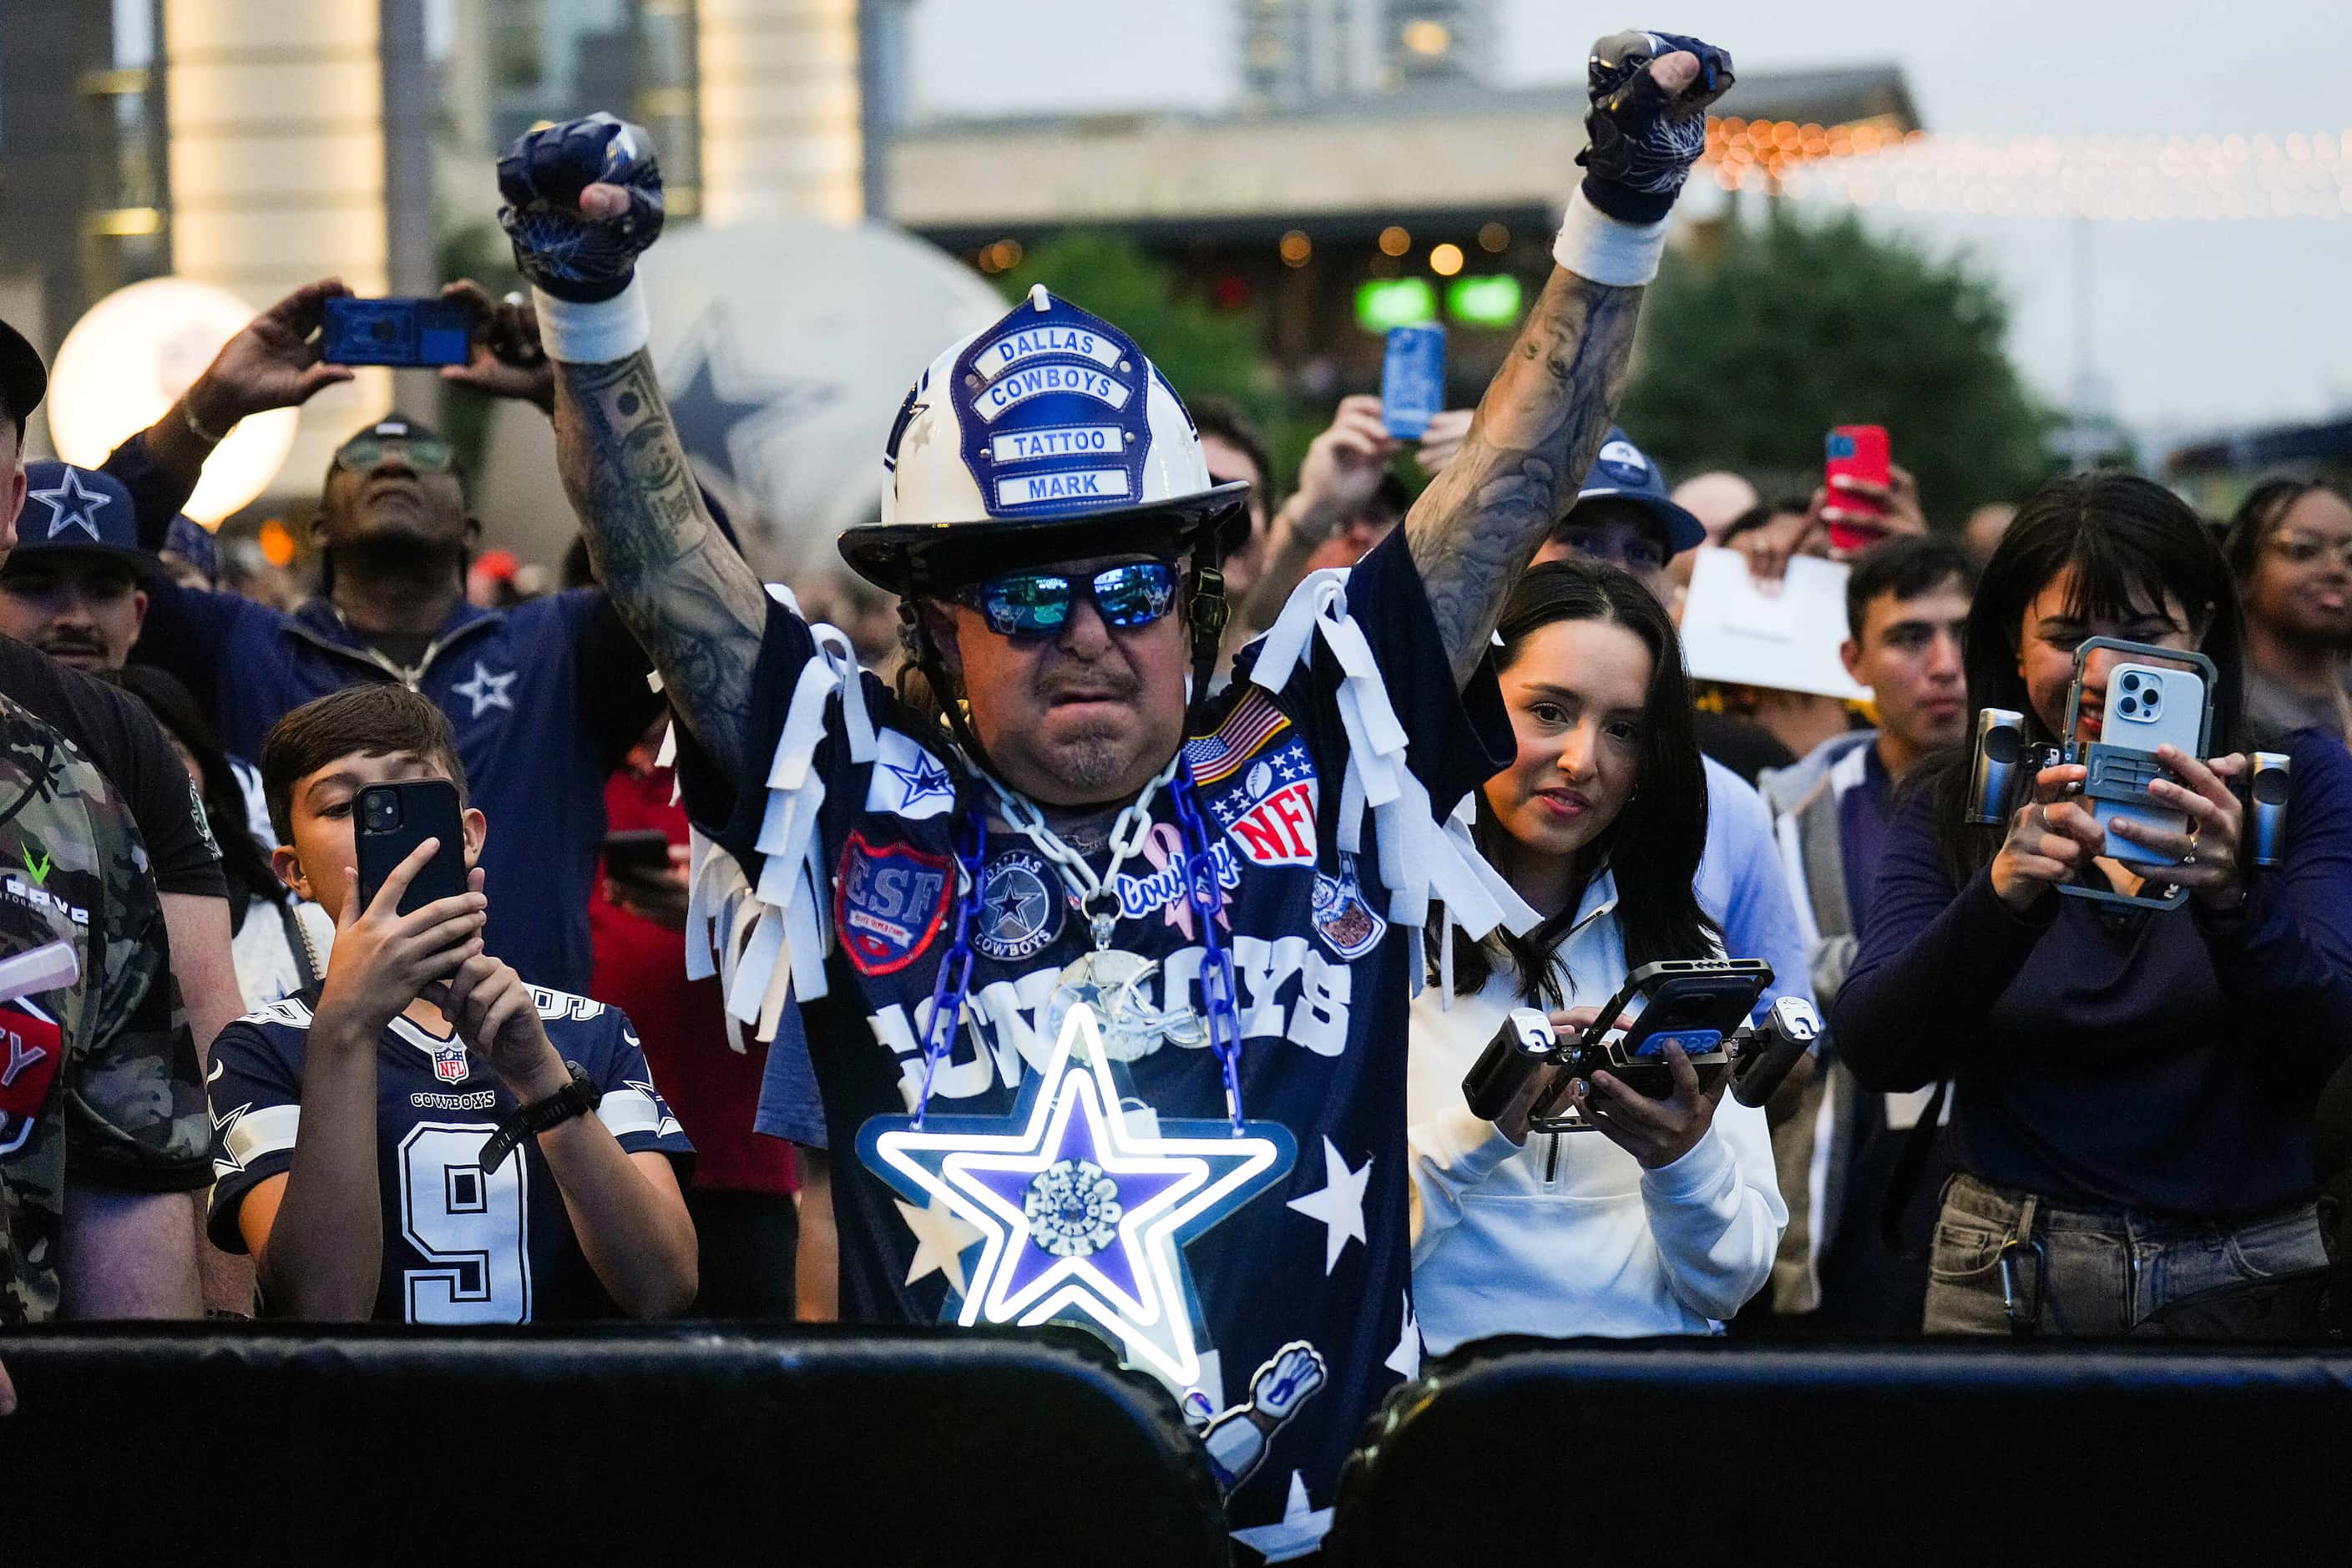 Dallas Cowboys fan Mark “Tattoo Mark” Shenefield cheers during a draft party for the first...